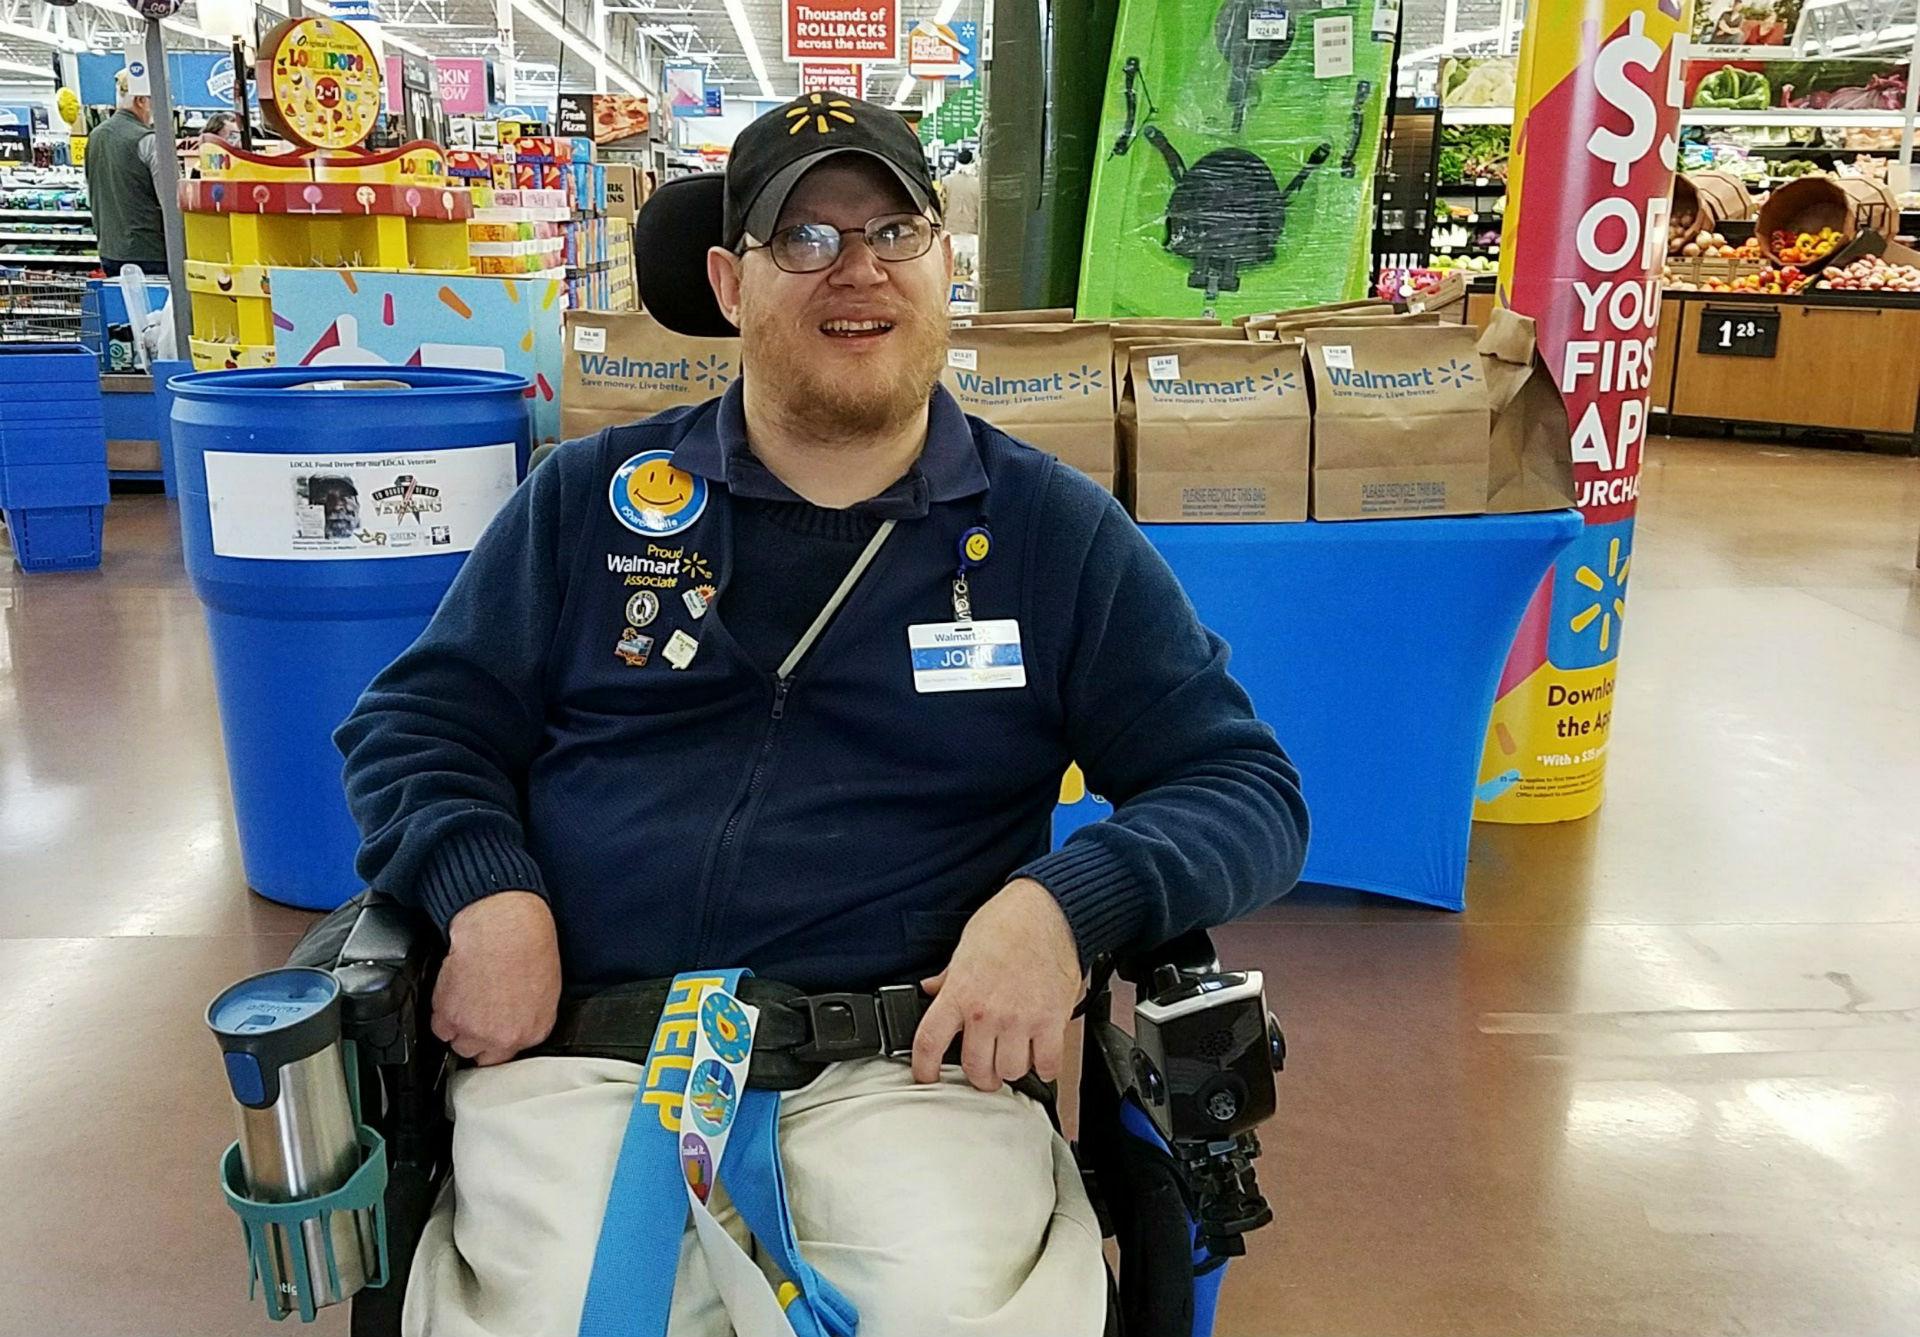 In this April 21, 2018 photo provided by Rachel Wasser, Walmart greeter John Combs works at a Walmart store in Vancouver, Washington. (Rachel Wasser via AP)